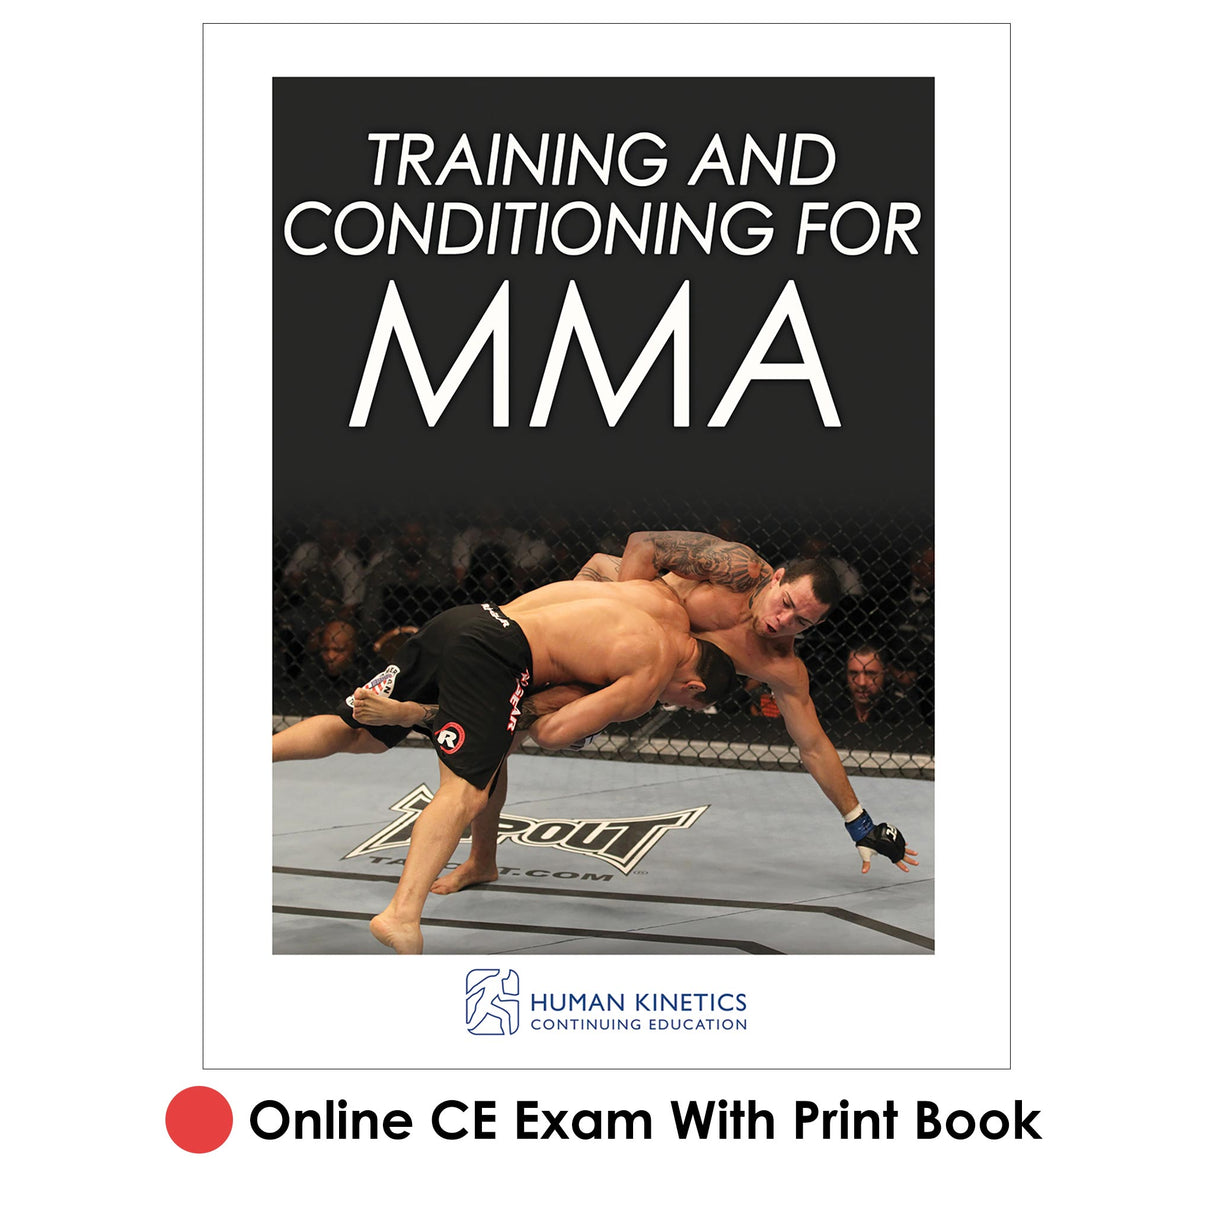 Training and Conditioning for MMA Online CE Exam With Print Book